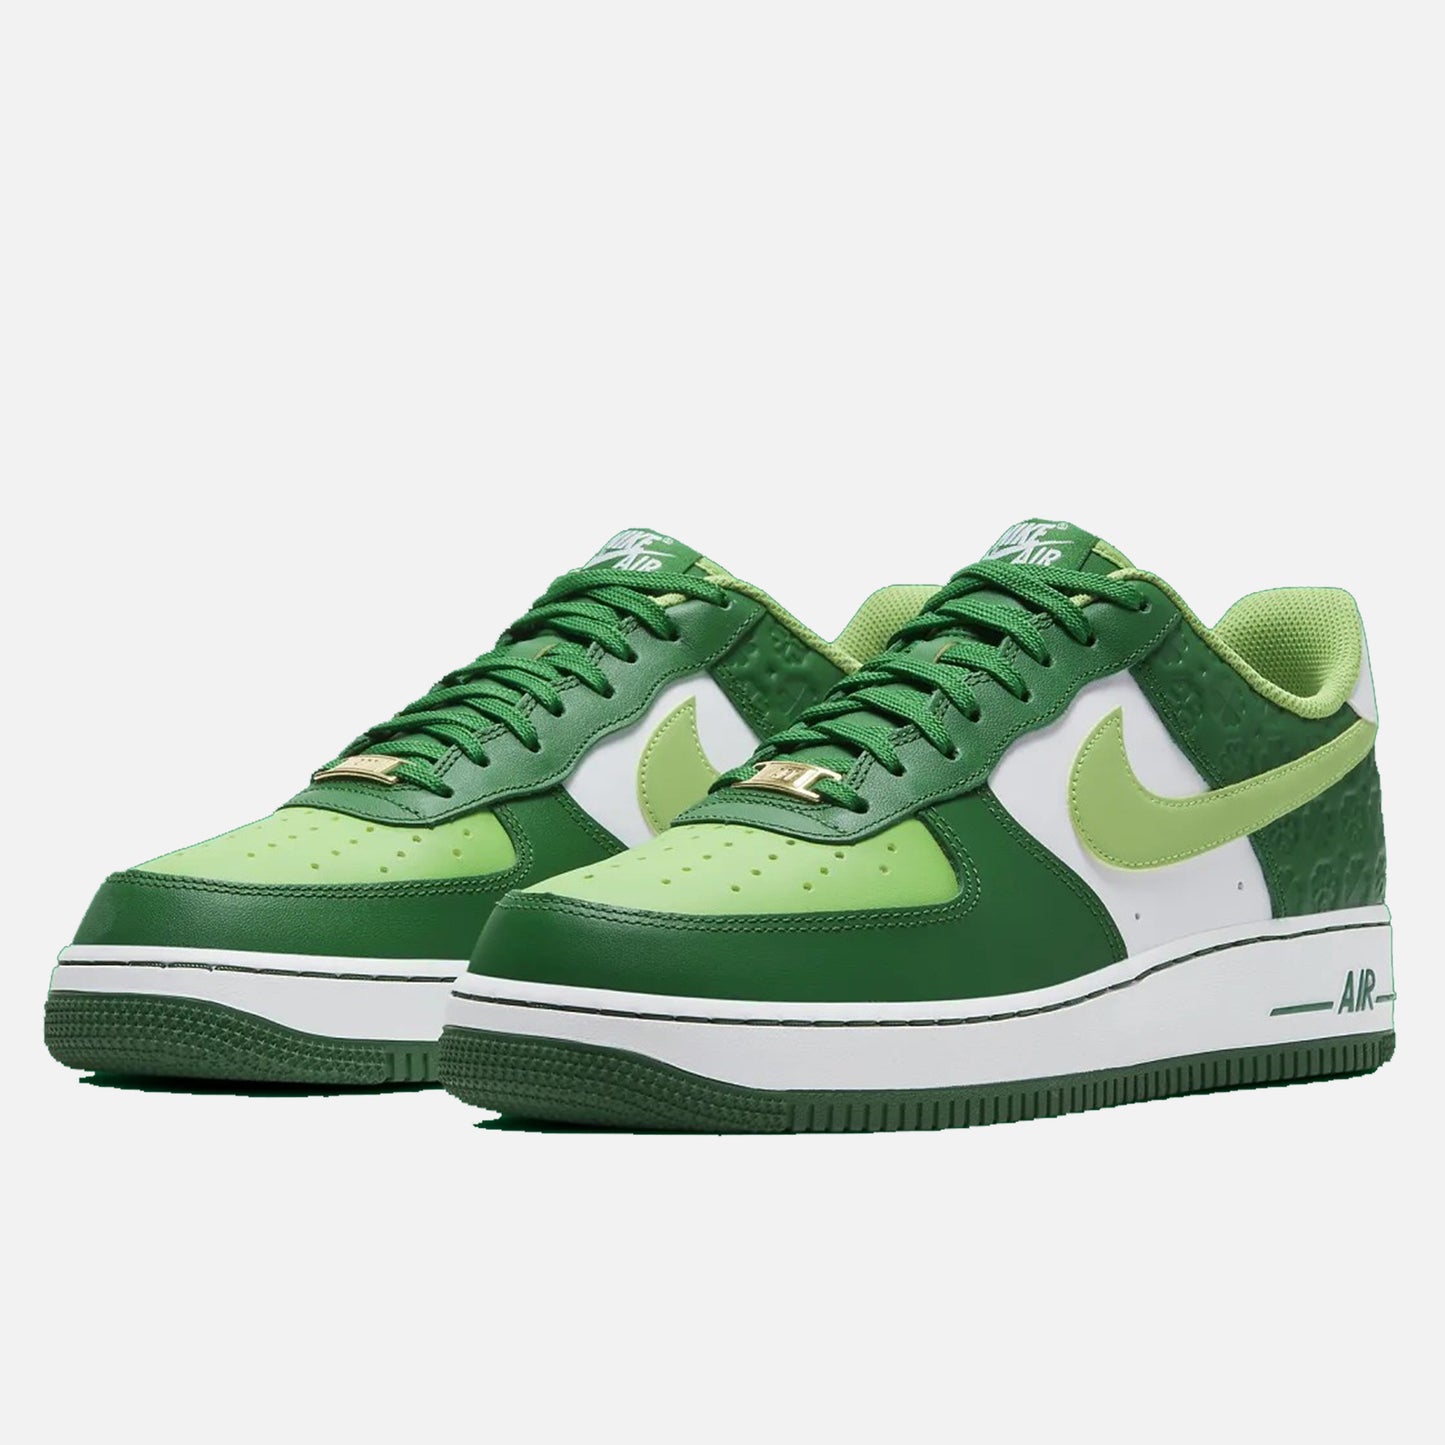 AIR FORCE ONE PATRICK'S DAY